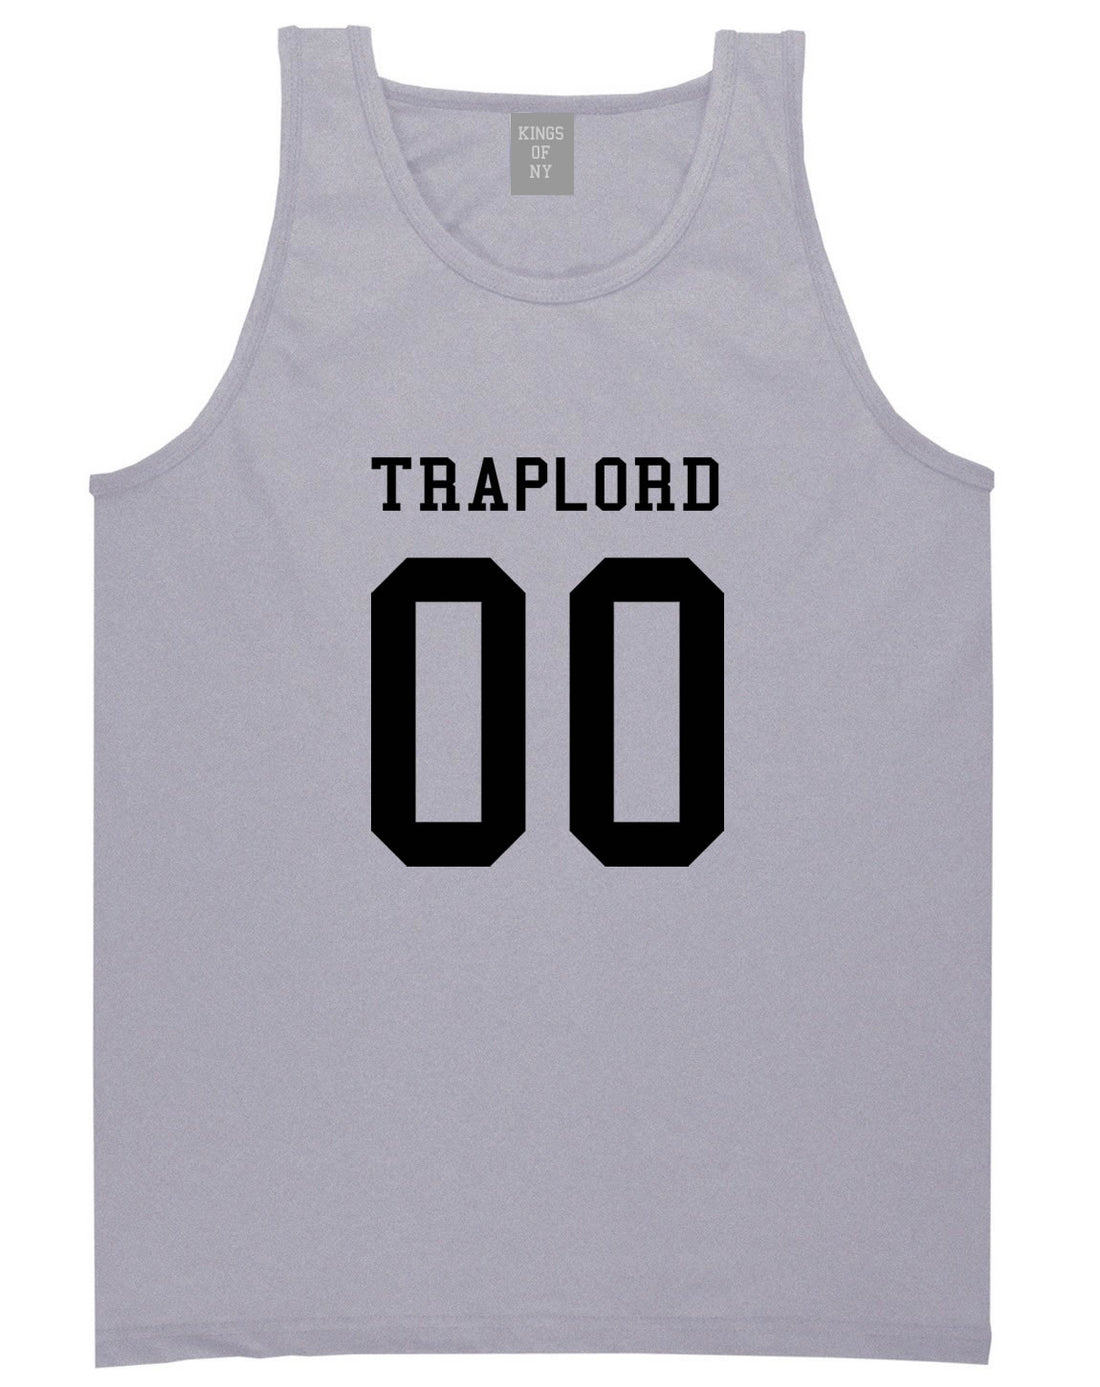 Traplord Team Jersey 00 Trap Lord Tank Top in Grey By Kings Of NY